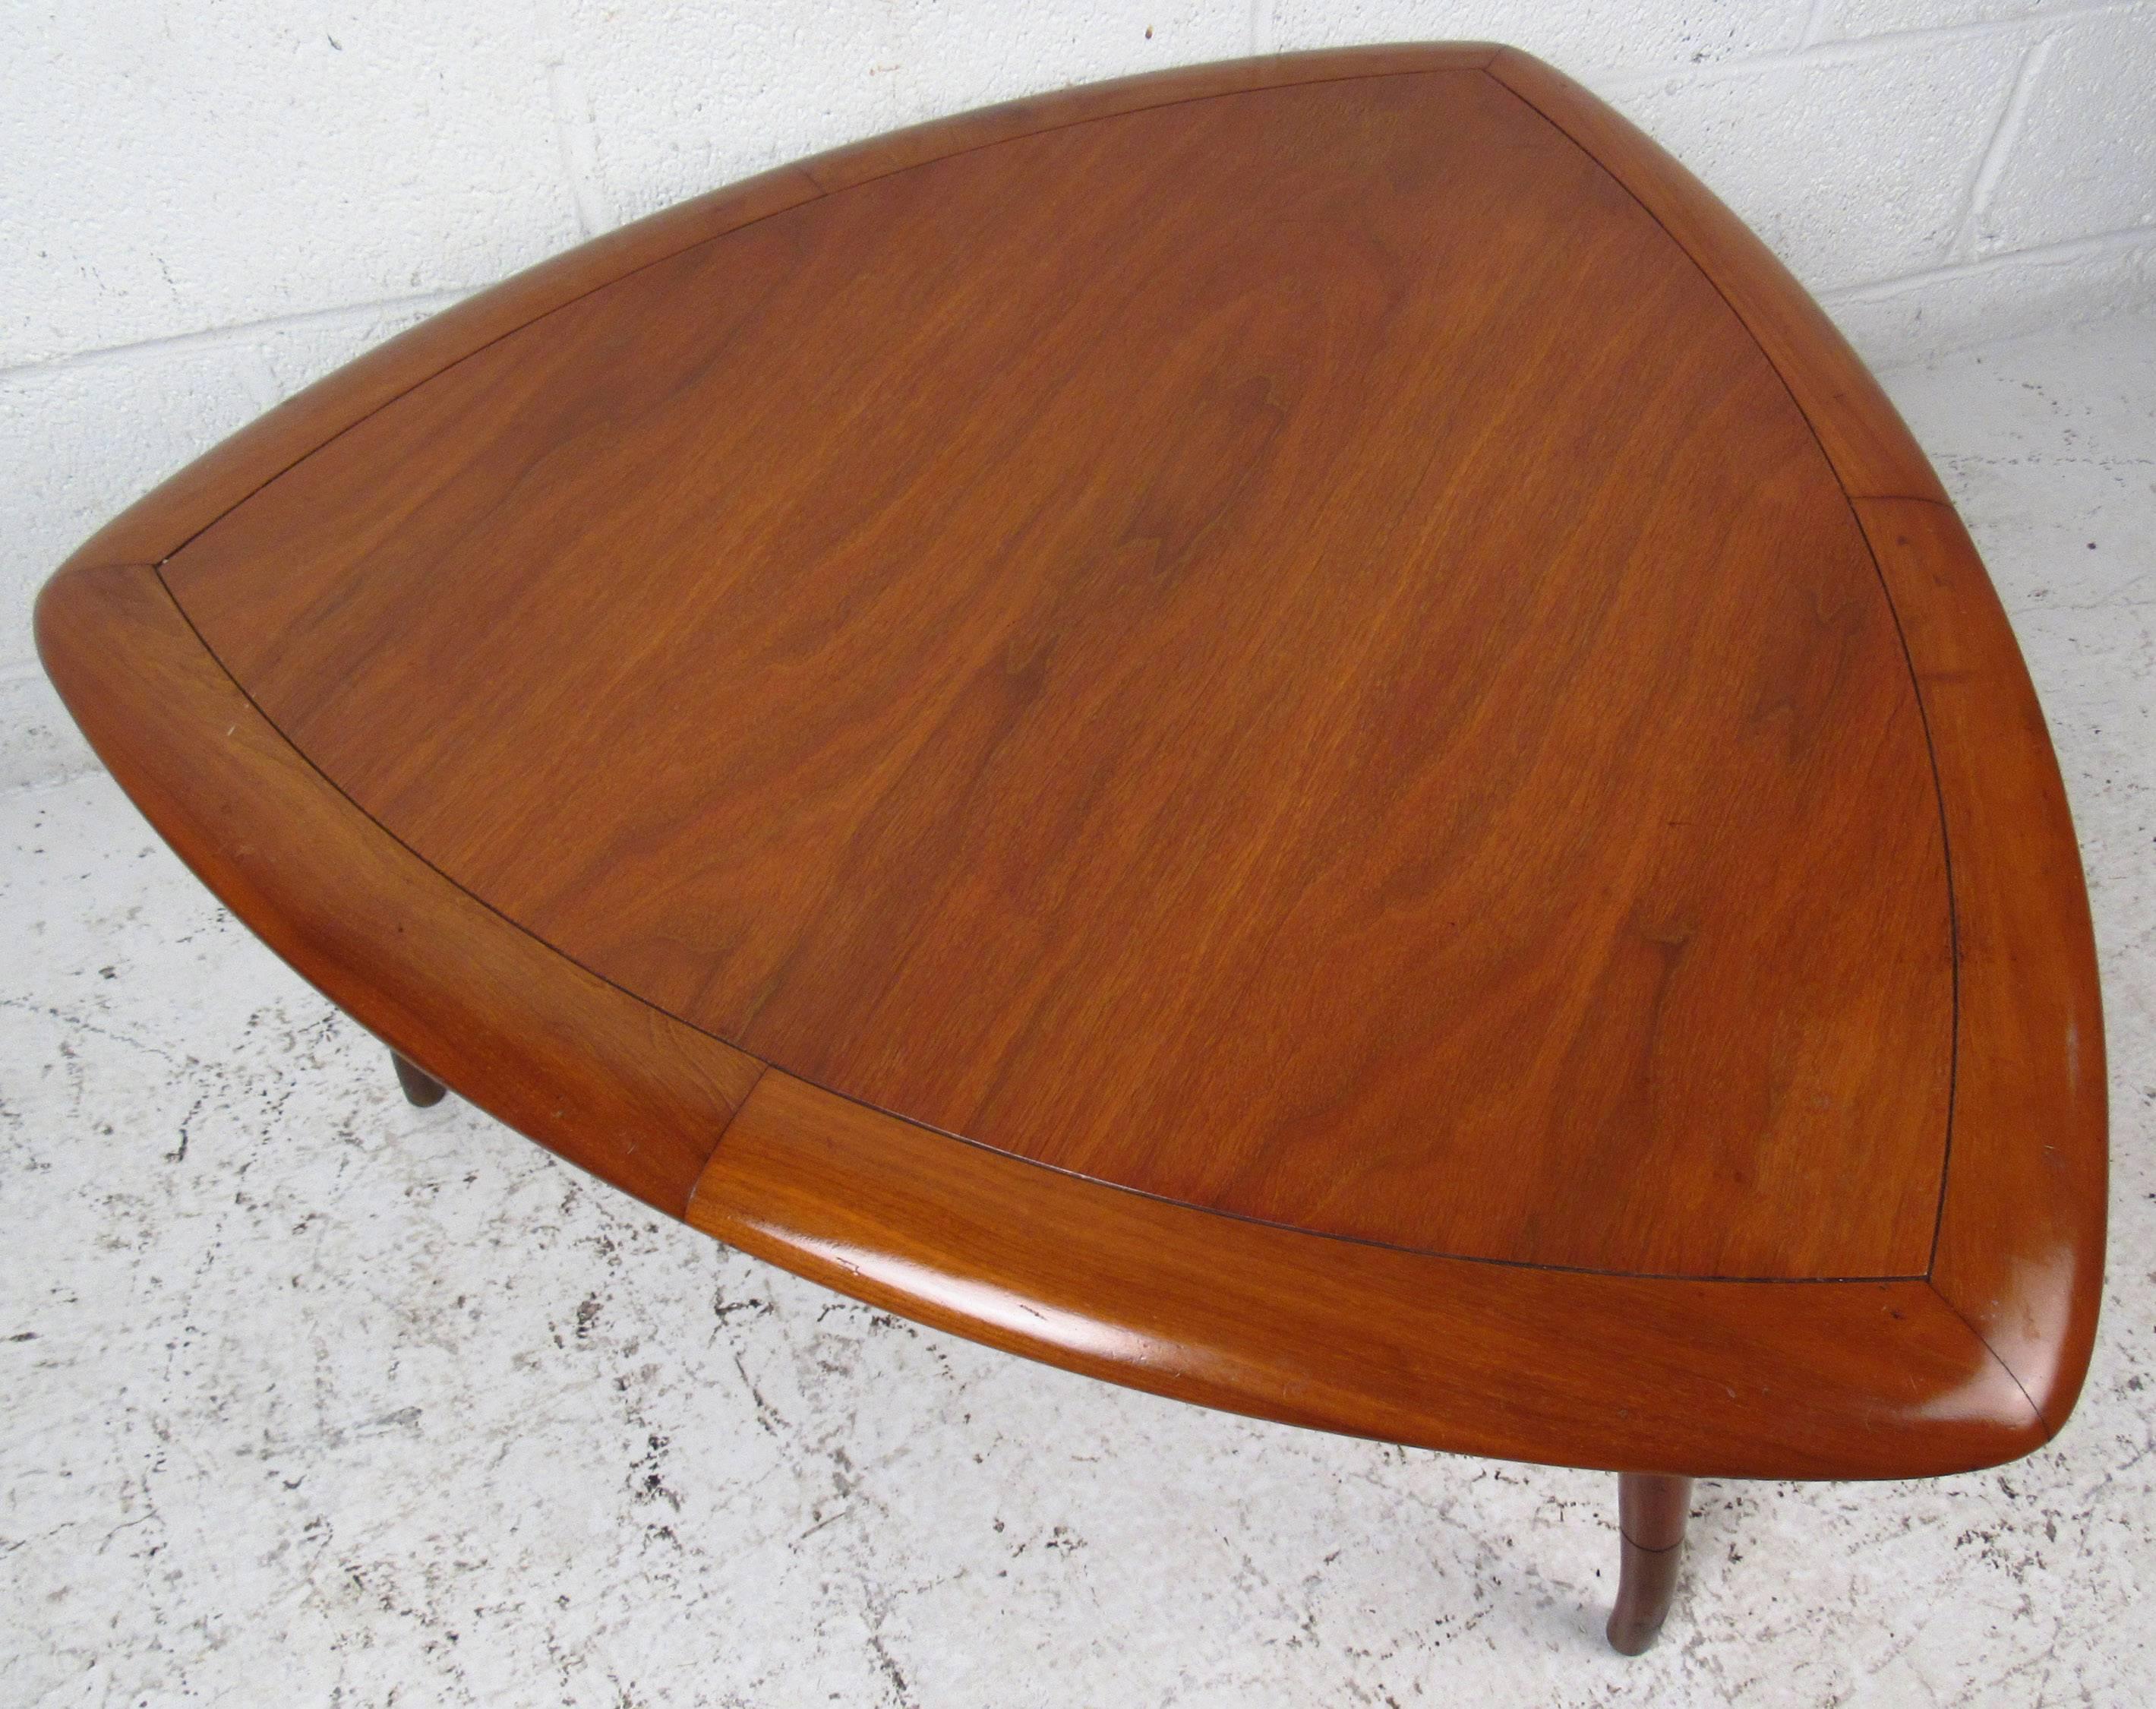 Vintage-modern coffee table by Tomlinson, features triangular top, walnut grain and beautifully sculpted legs. This unusual piece makes the perfect eye catching addition to any modern interior. Please confirm item location (NY or NJ).

Please